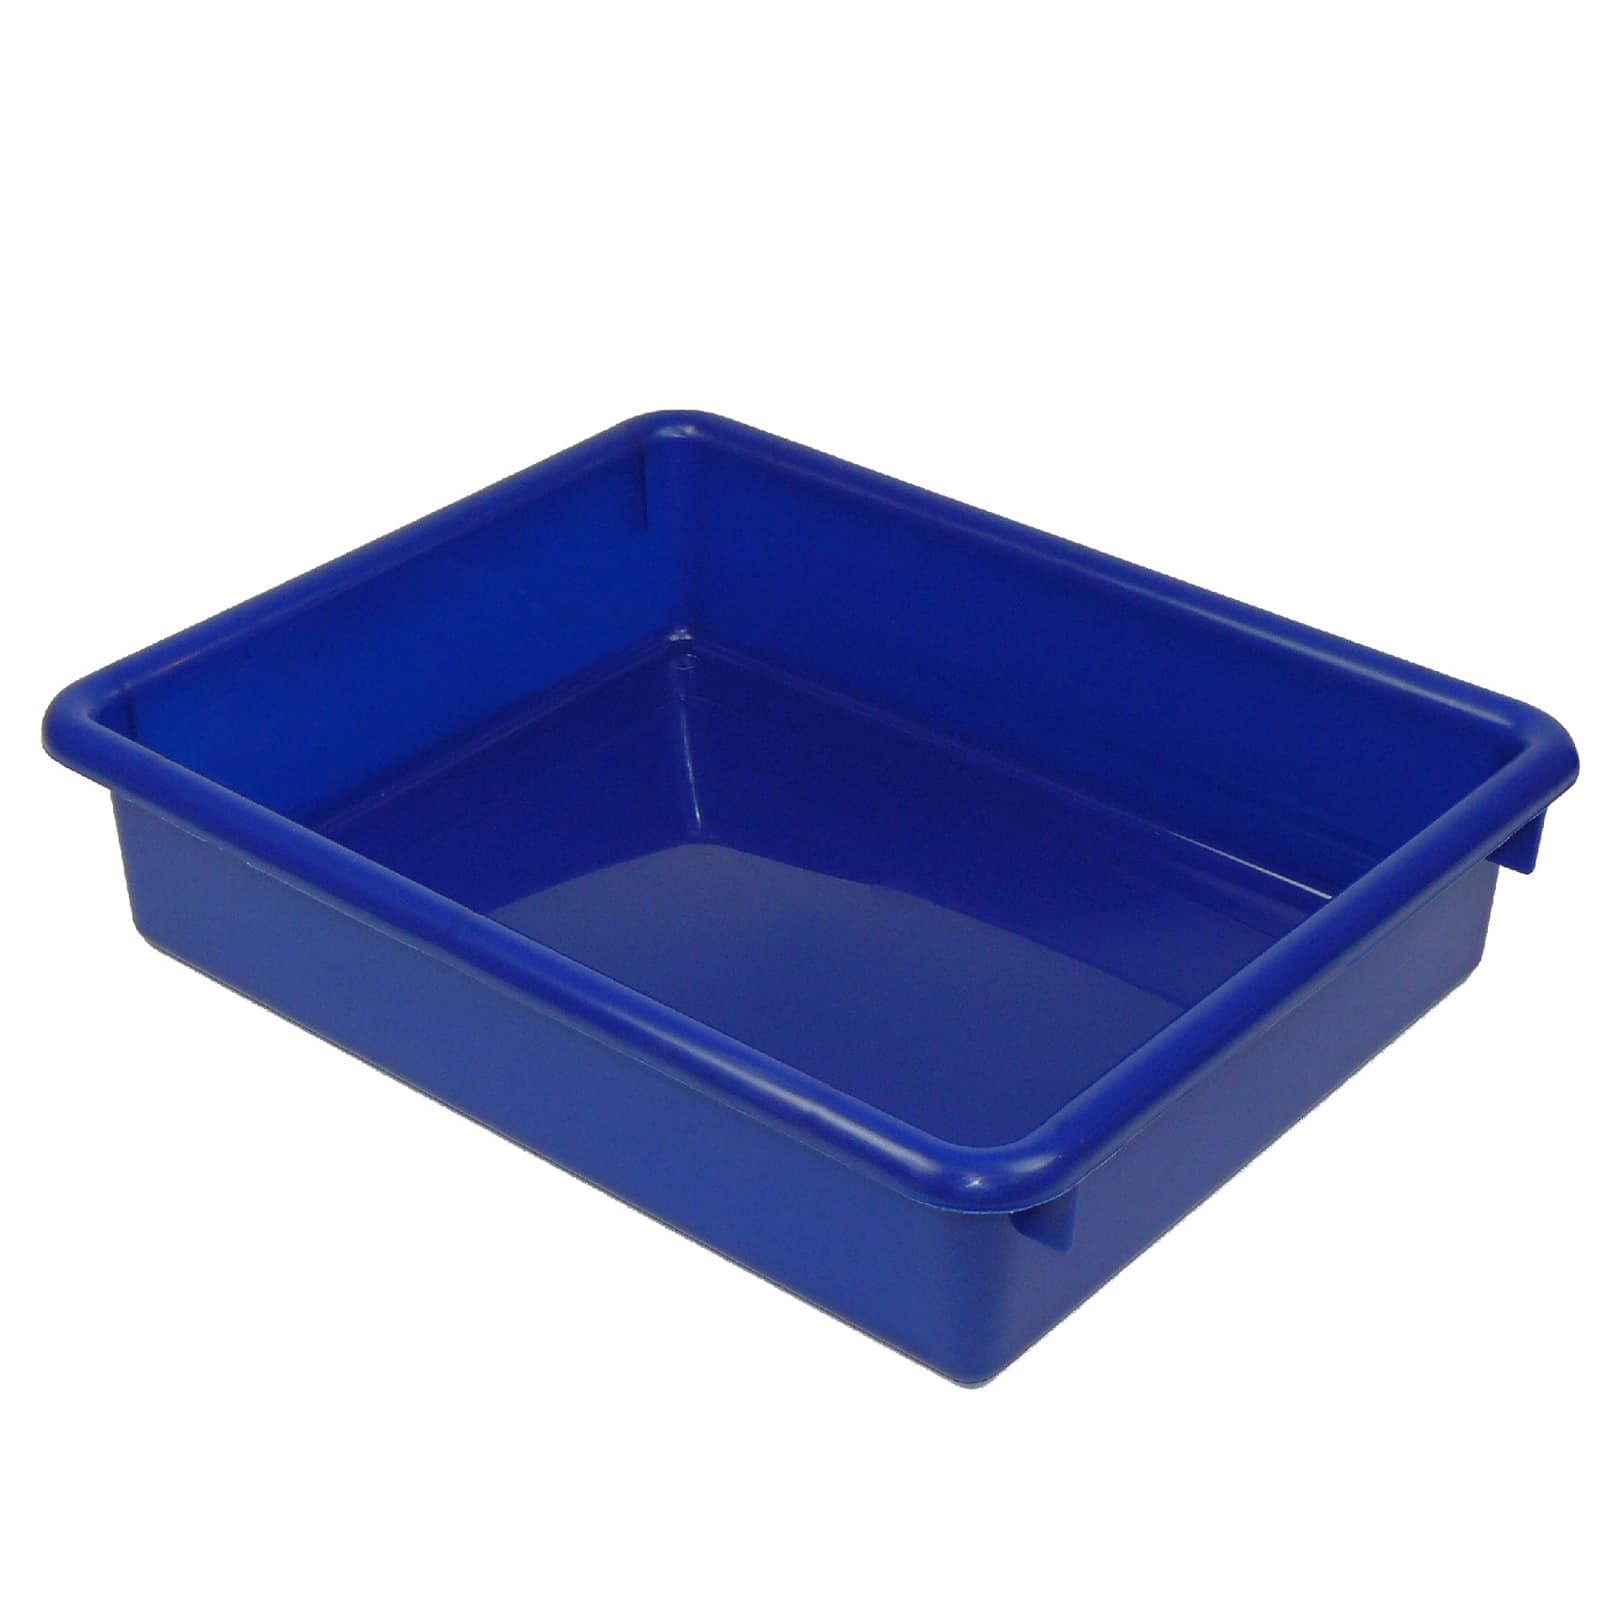 Find the Stowaway® Letter Tray, 3ct. at Michaels.com